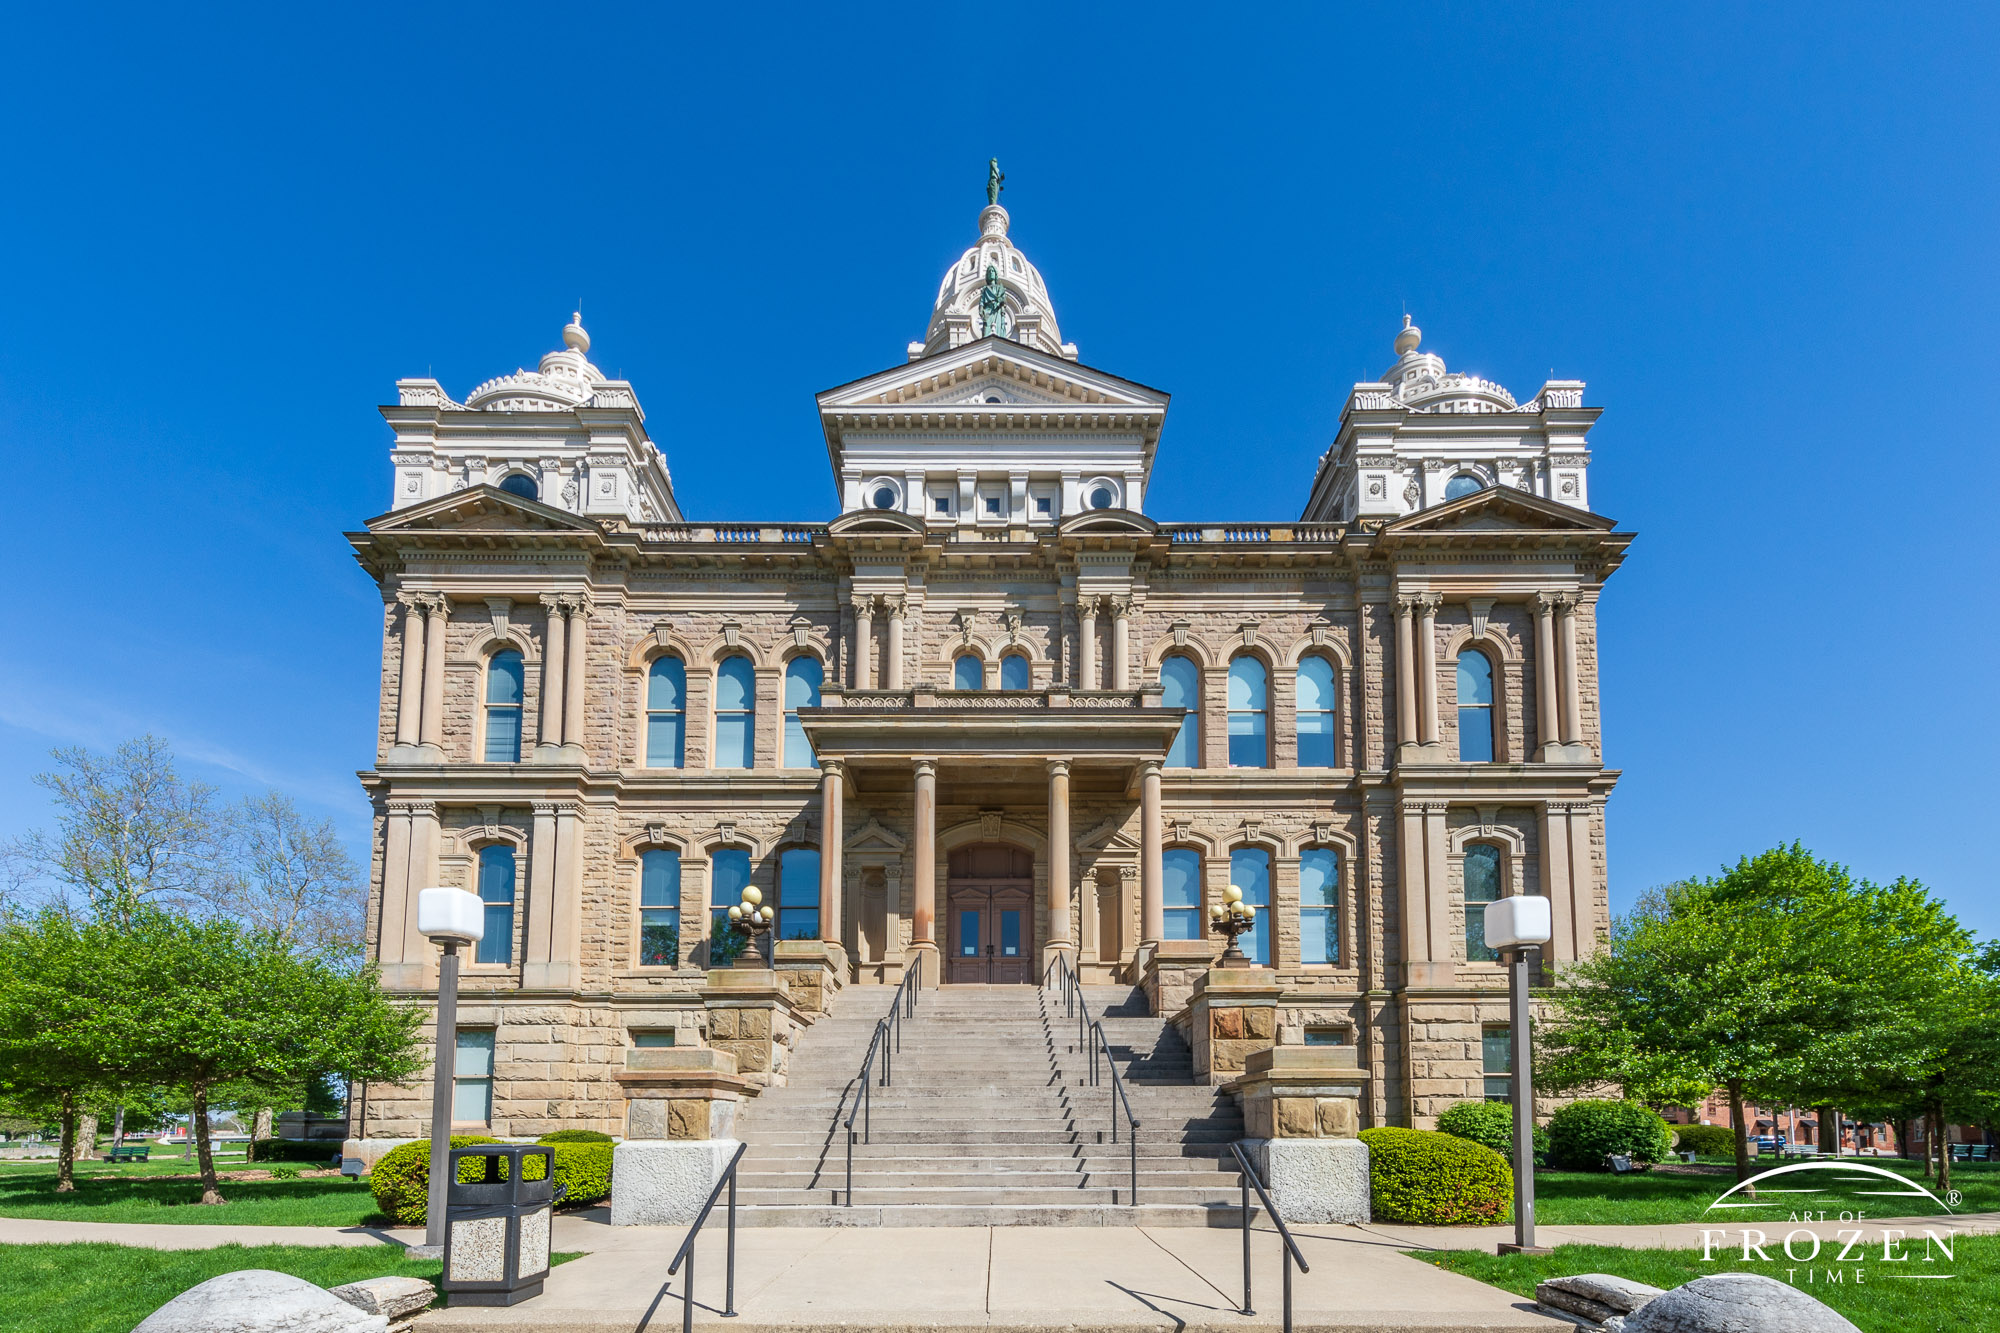 A dayttime view of the Miami County, Ohio Courthouse showing its Corinthian columns and ornate facade in the warm spring light.